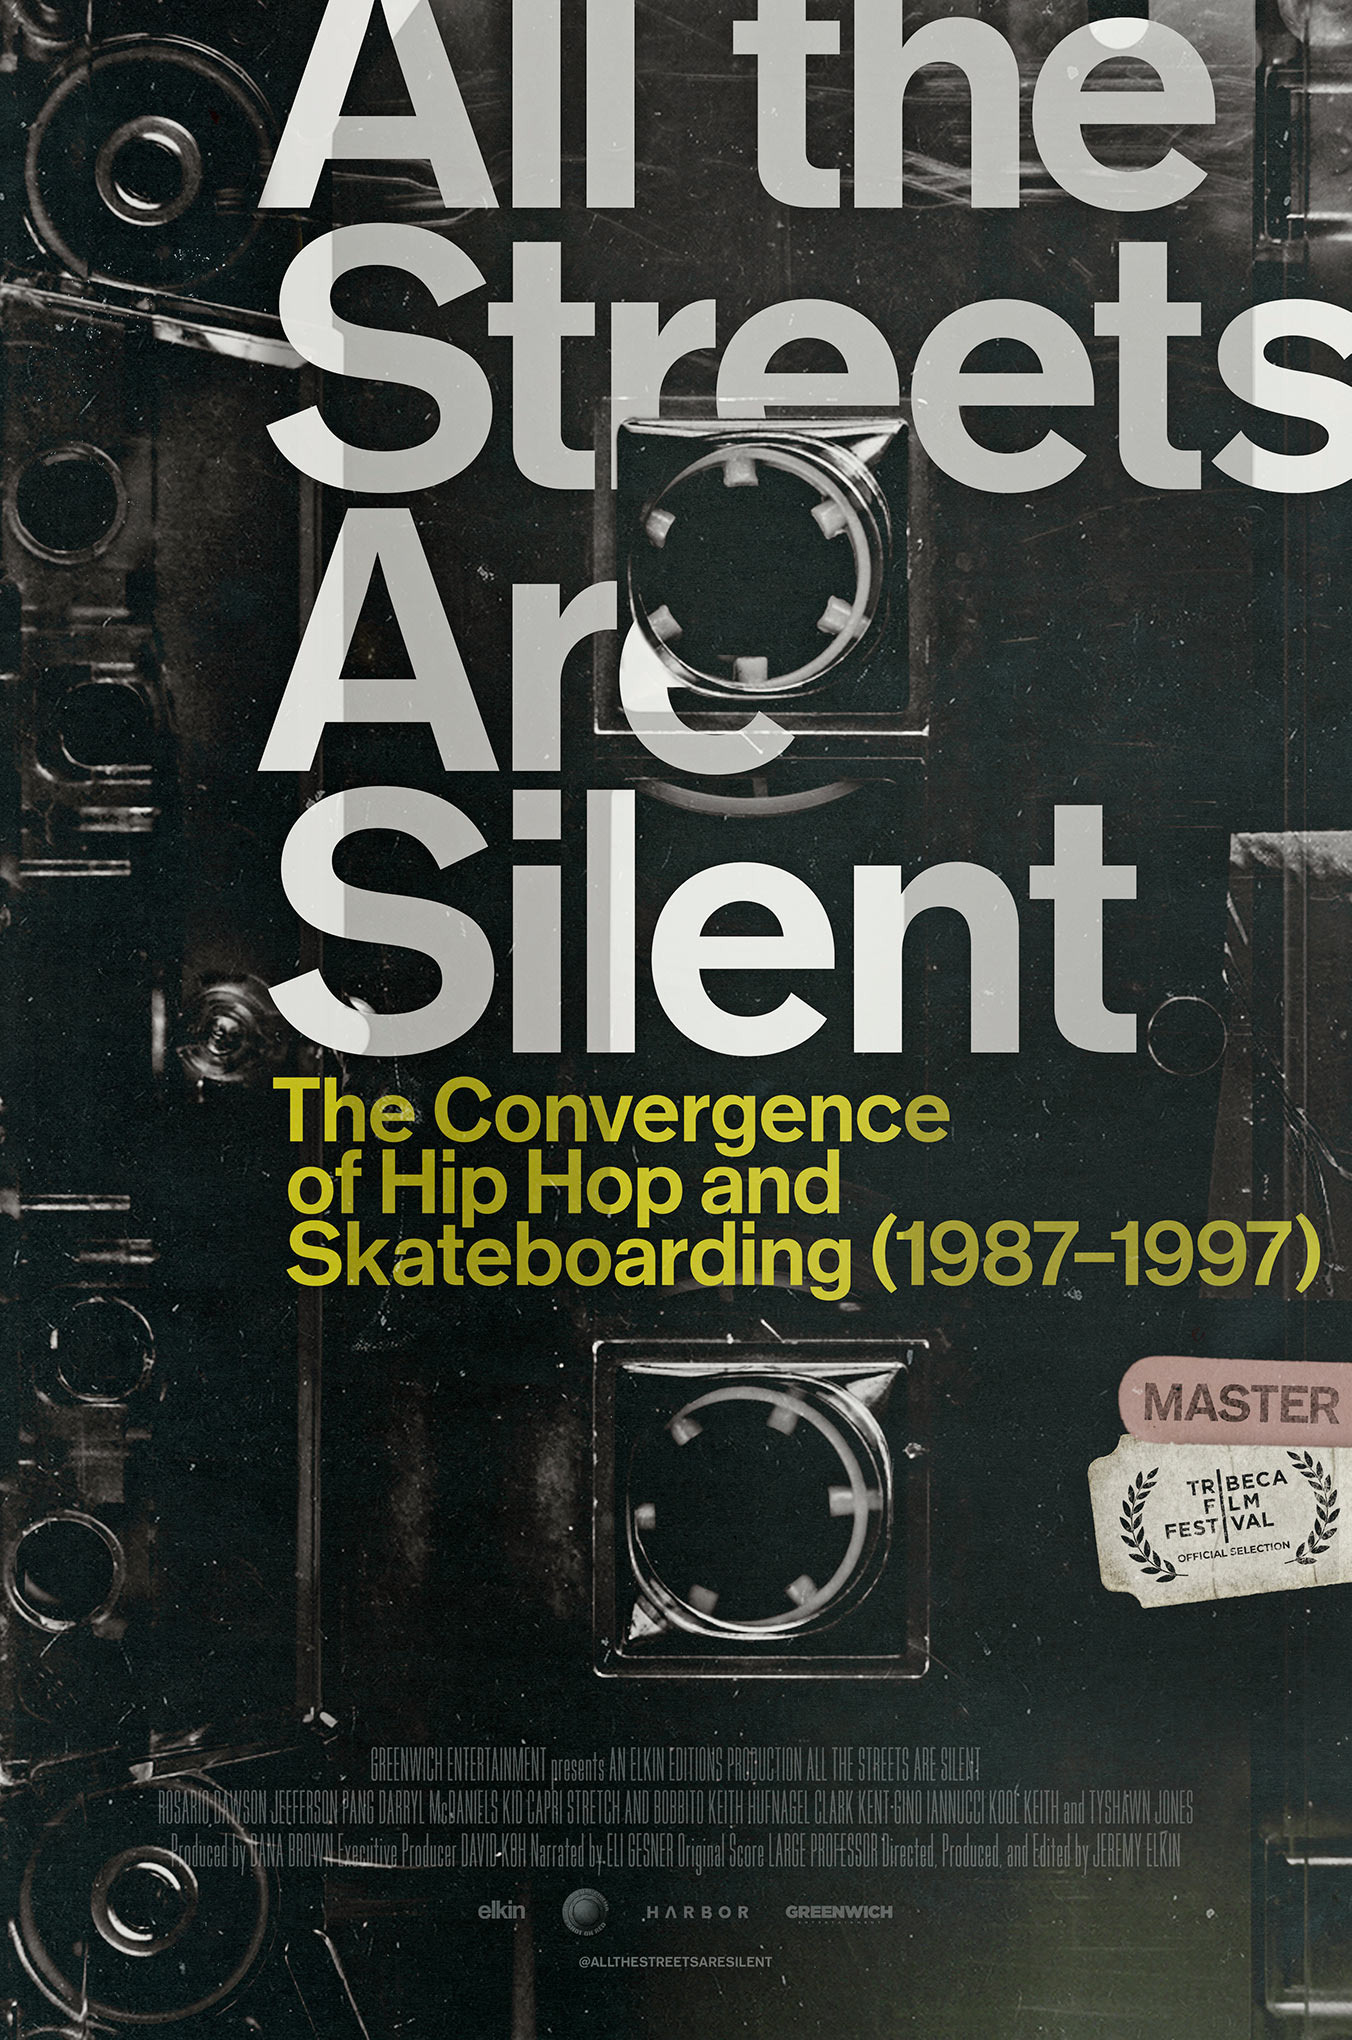 Mega Sized Movie Poster Image for All the Streets Are Silent: The Convergence of Hip Hop and Skateboarding 